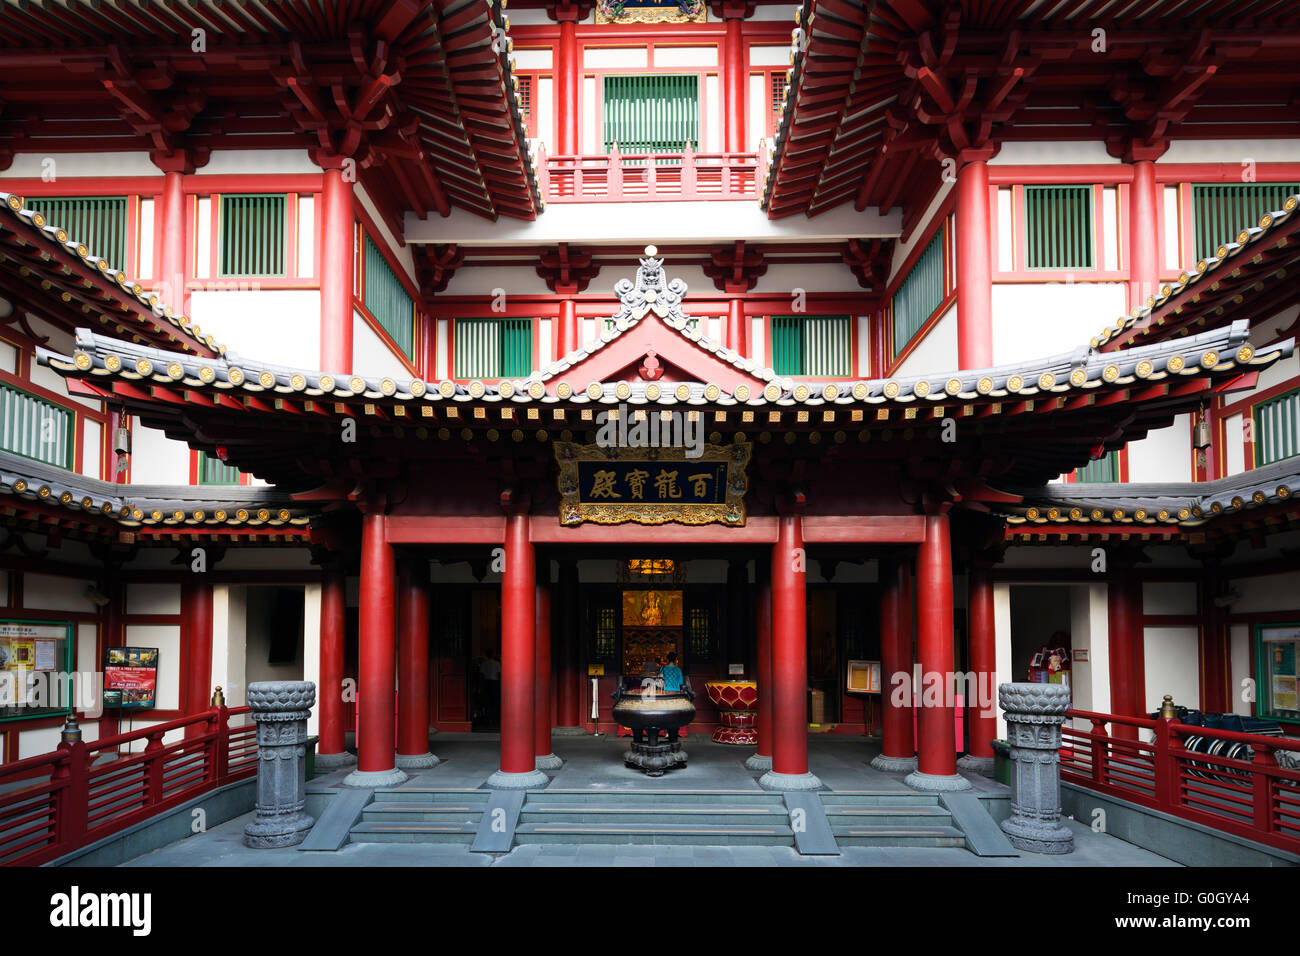 South East Asia, Singapore, Chinatown, Buddha Tooth Relic temple Stock Photo